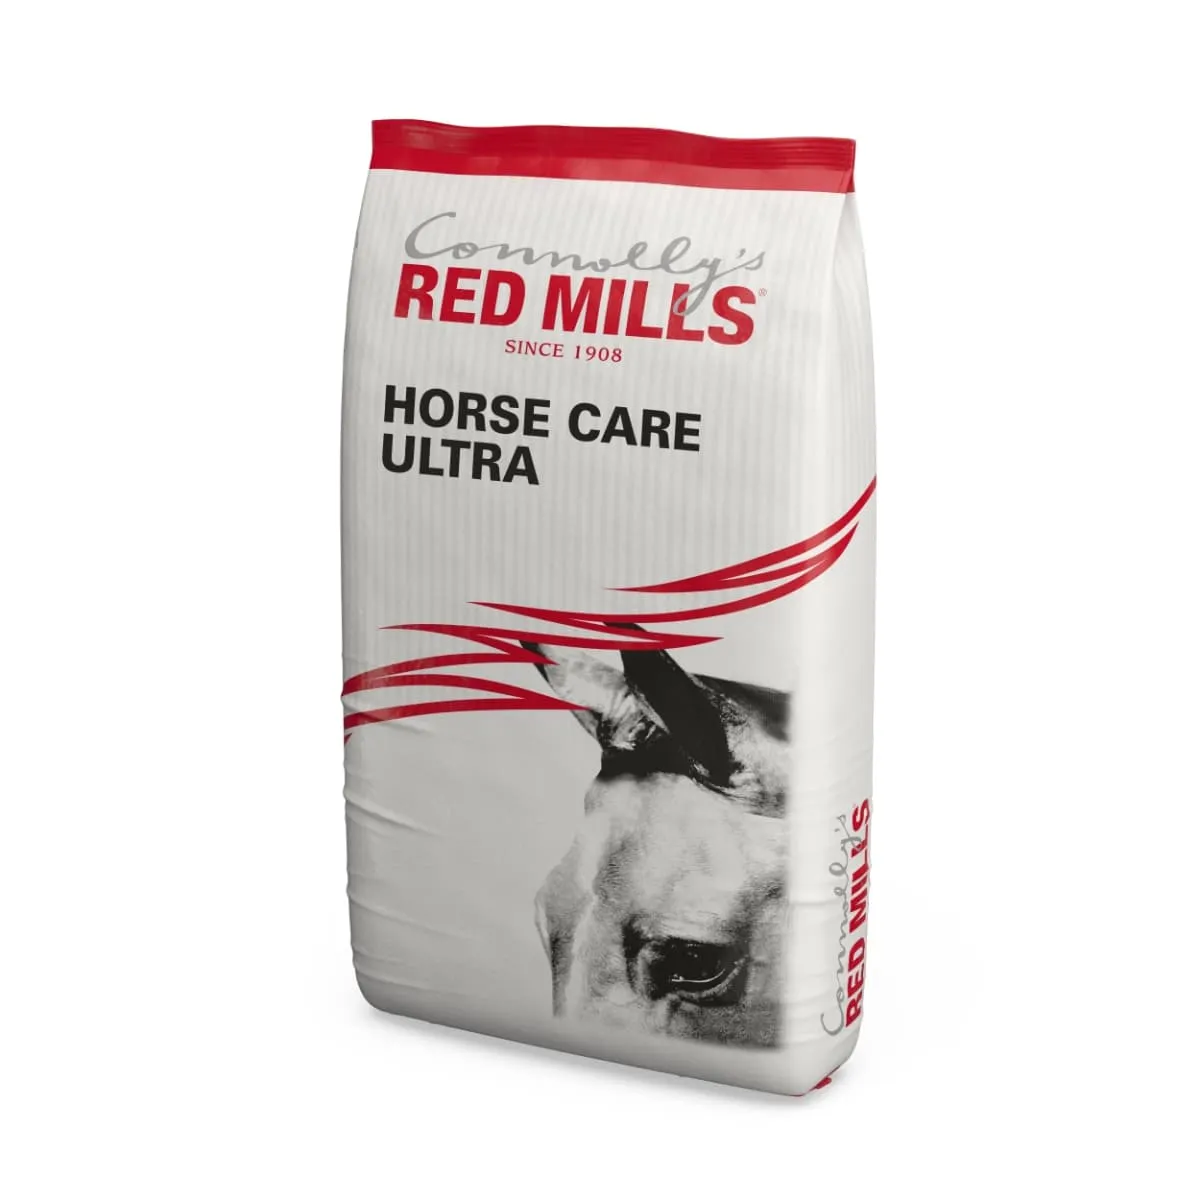 Your FAQs on new Horse Care Ultra Pellets